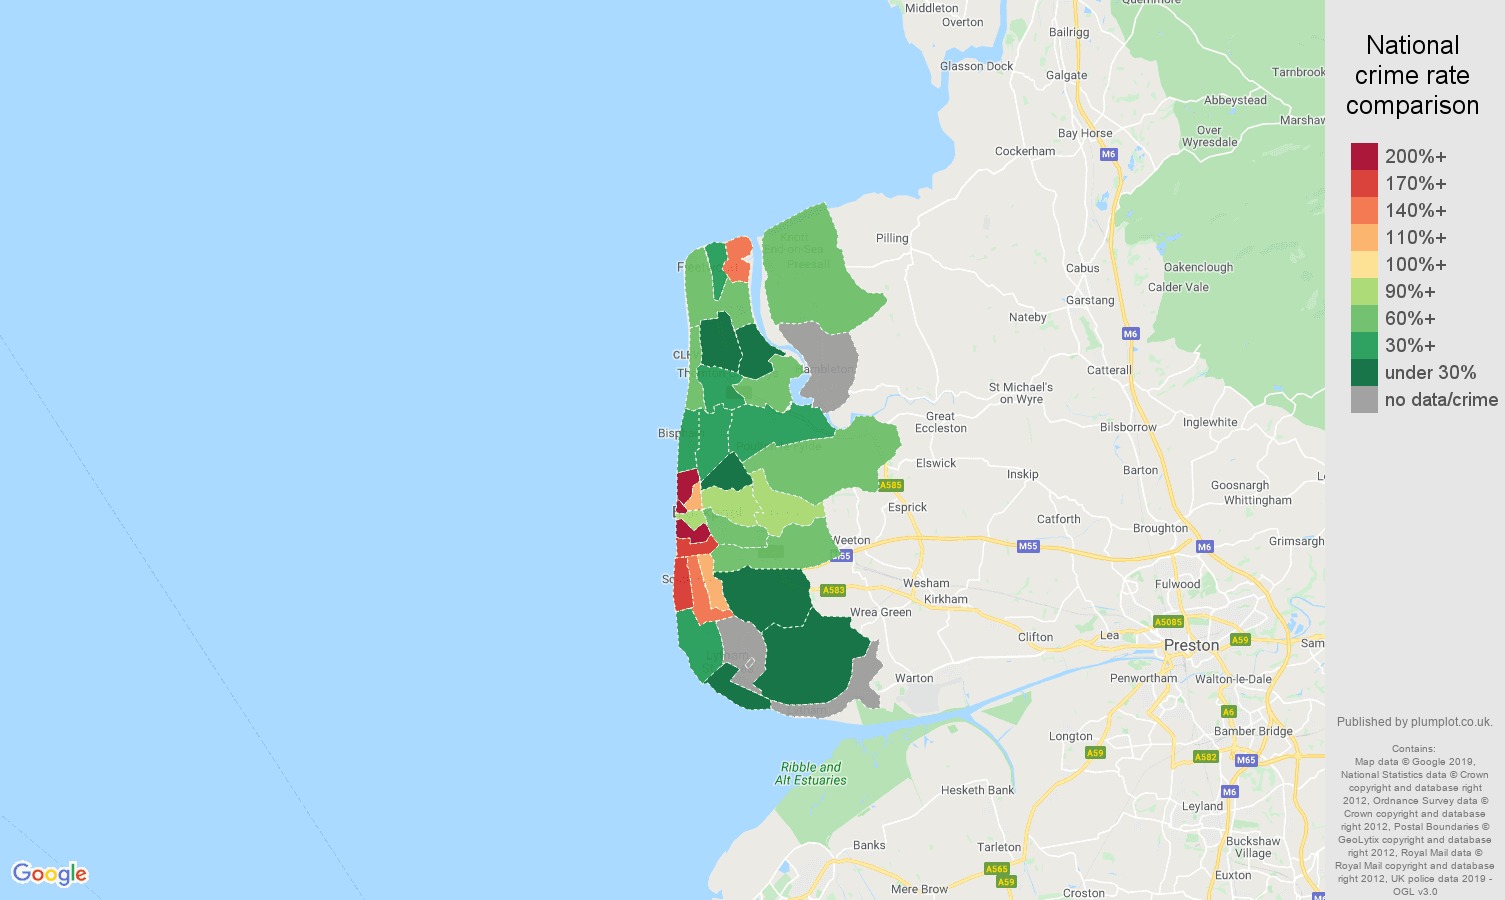 Blackpool possession of weapons crime rate comparison map